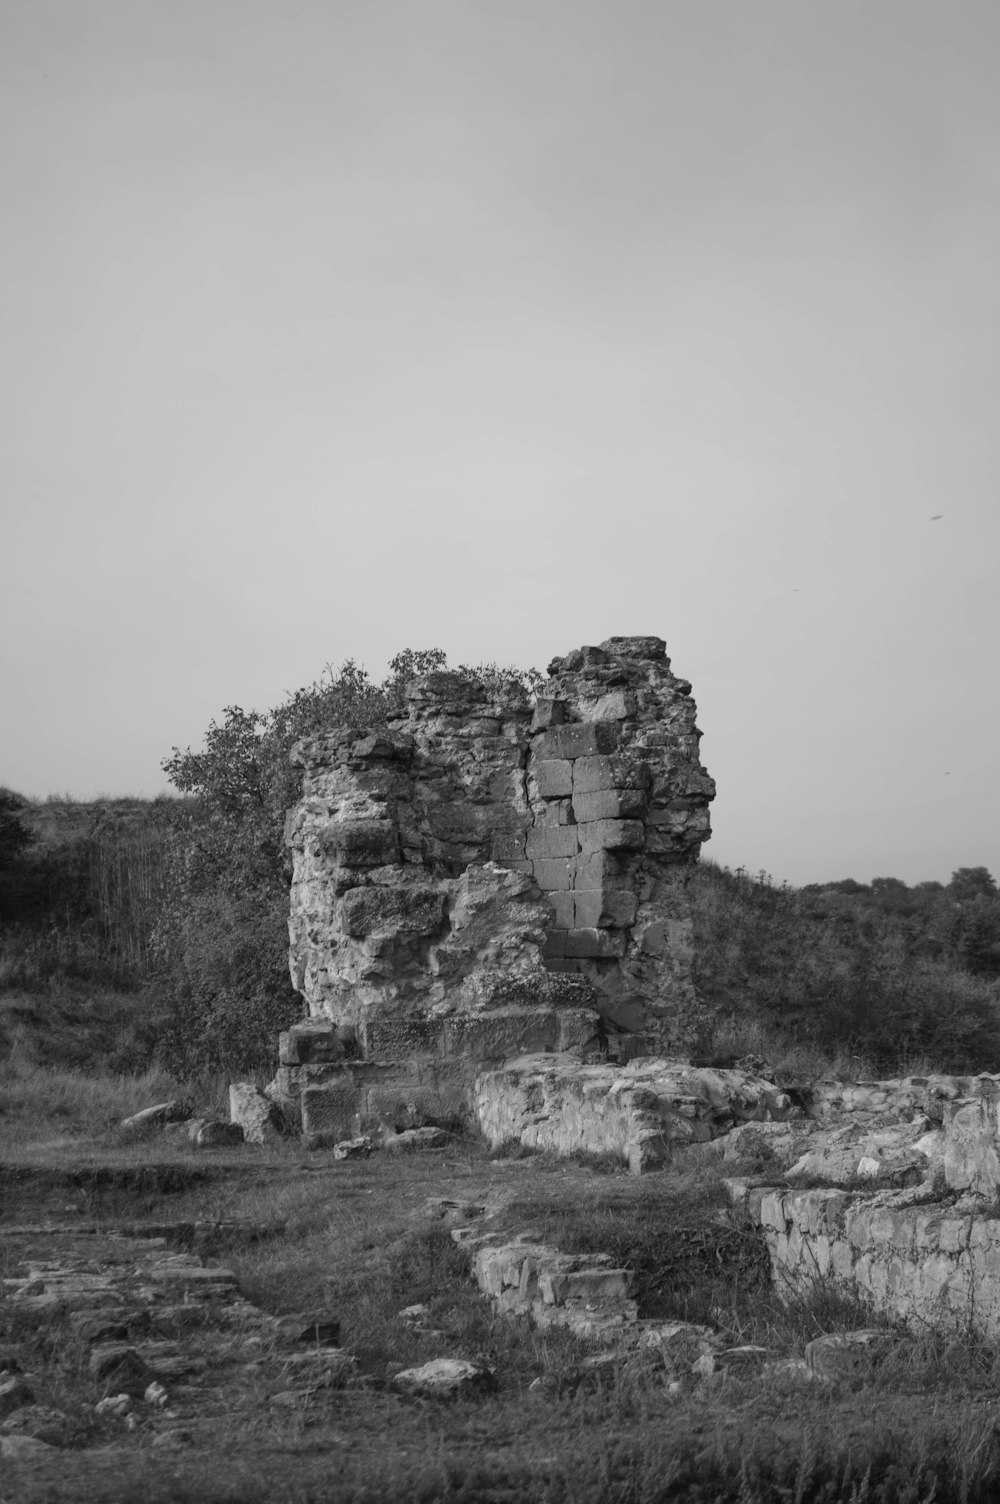 a black and white photo of a ruined building